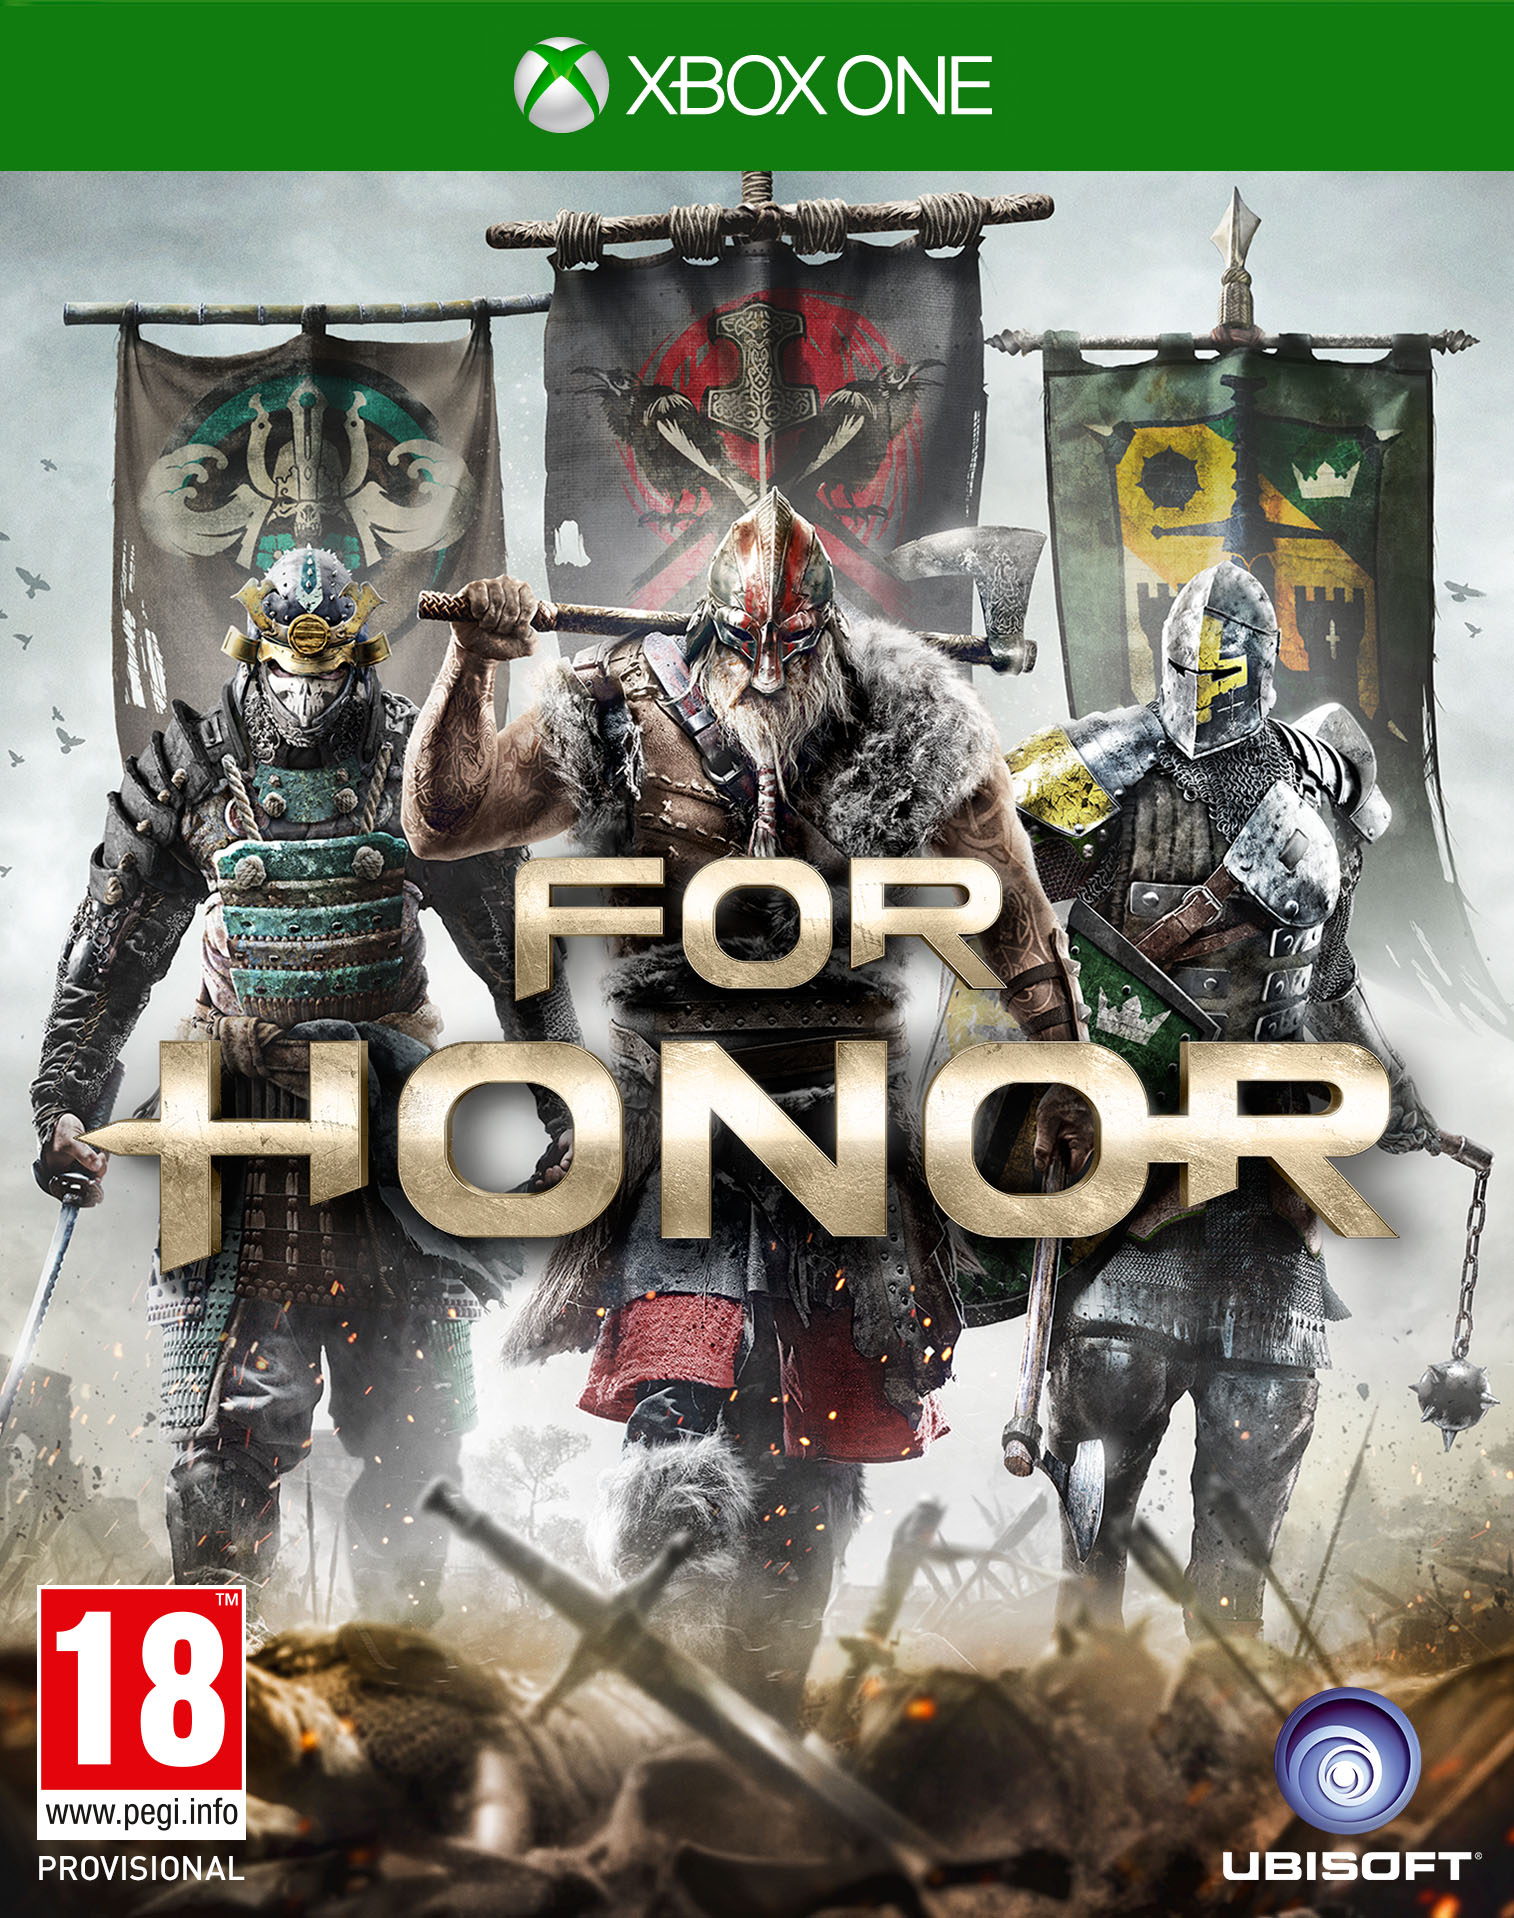 domesticeren leven slecht humeur Buy For Honor for Xbox One